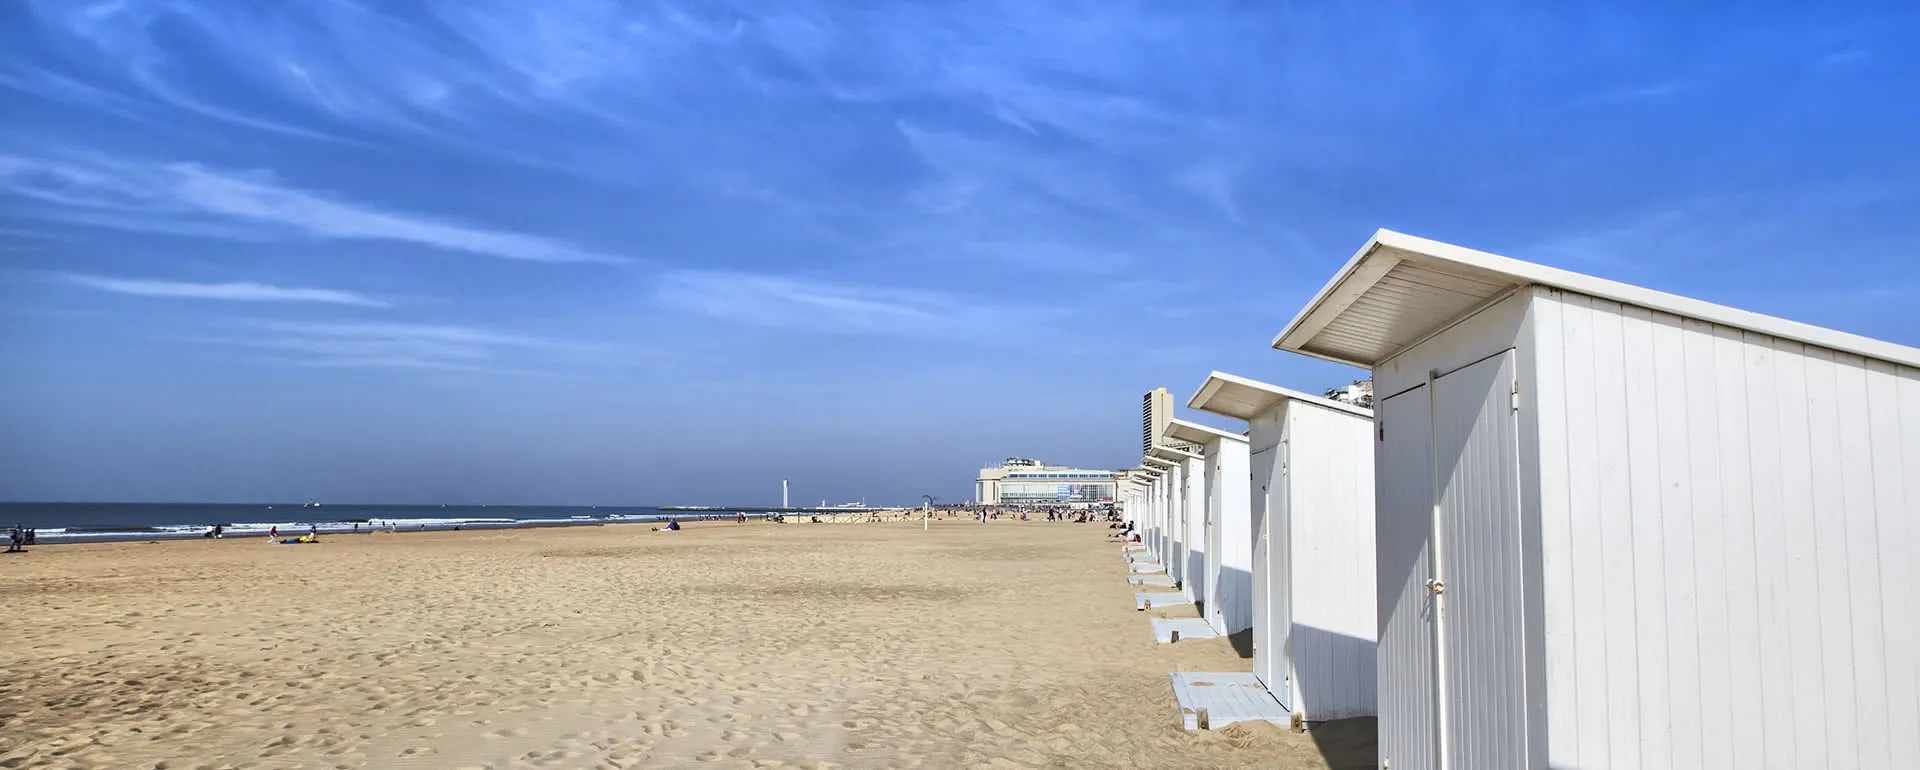 Ostende - the destination for group trips